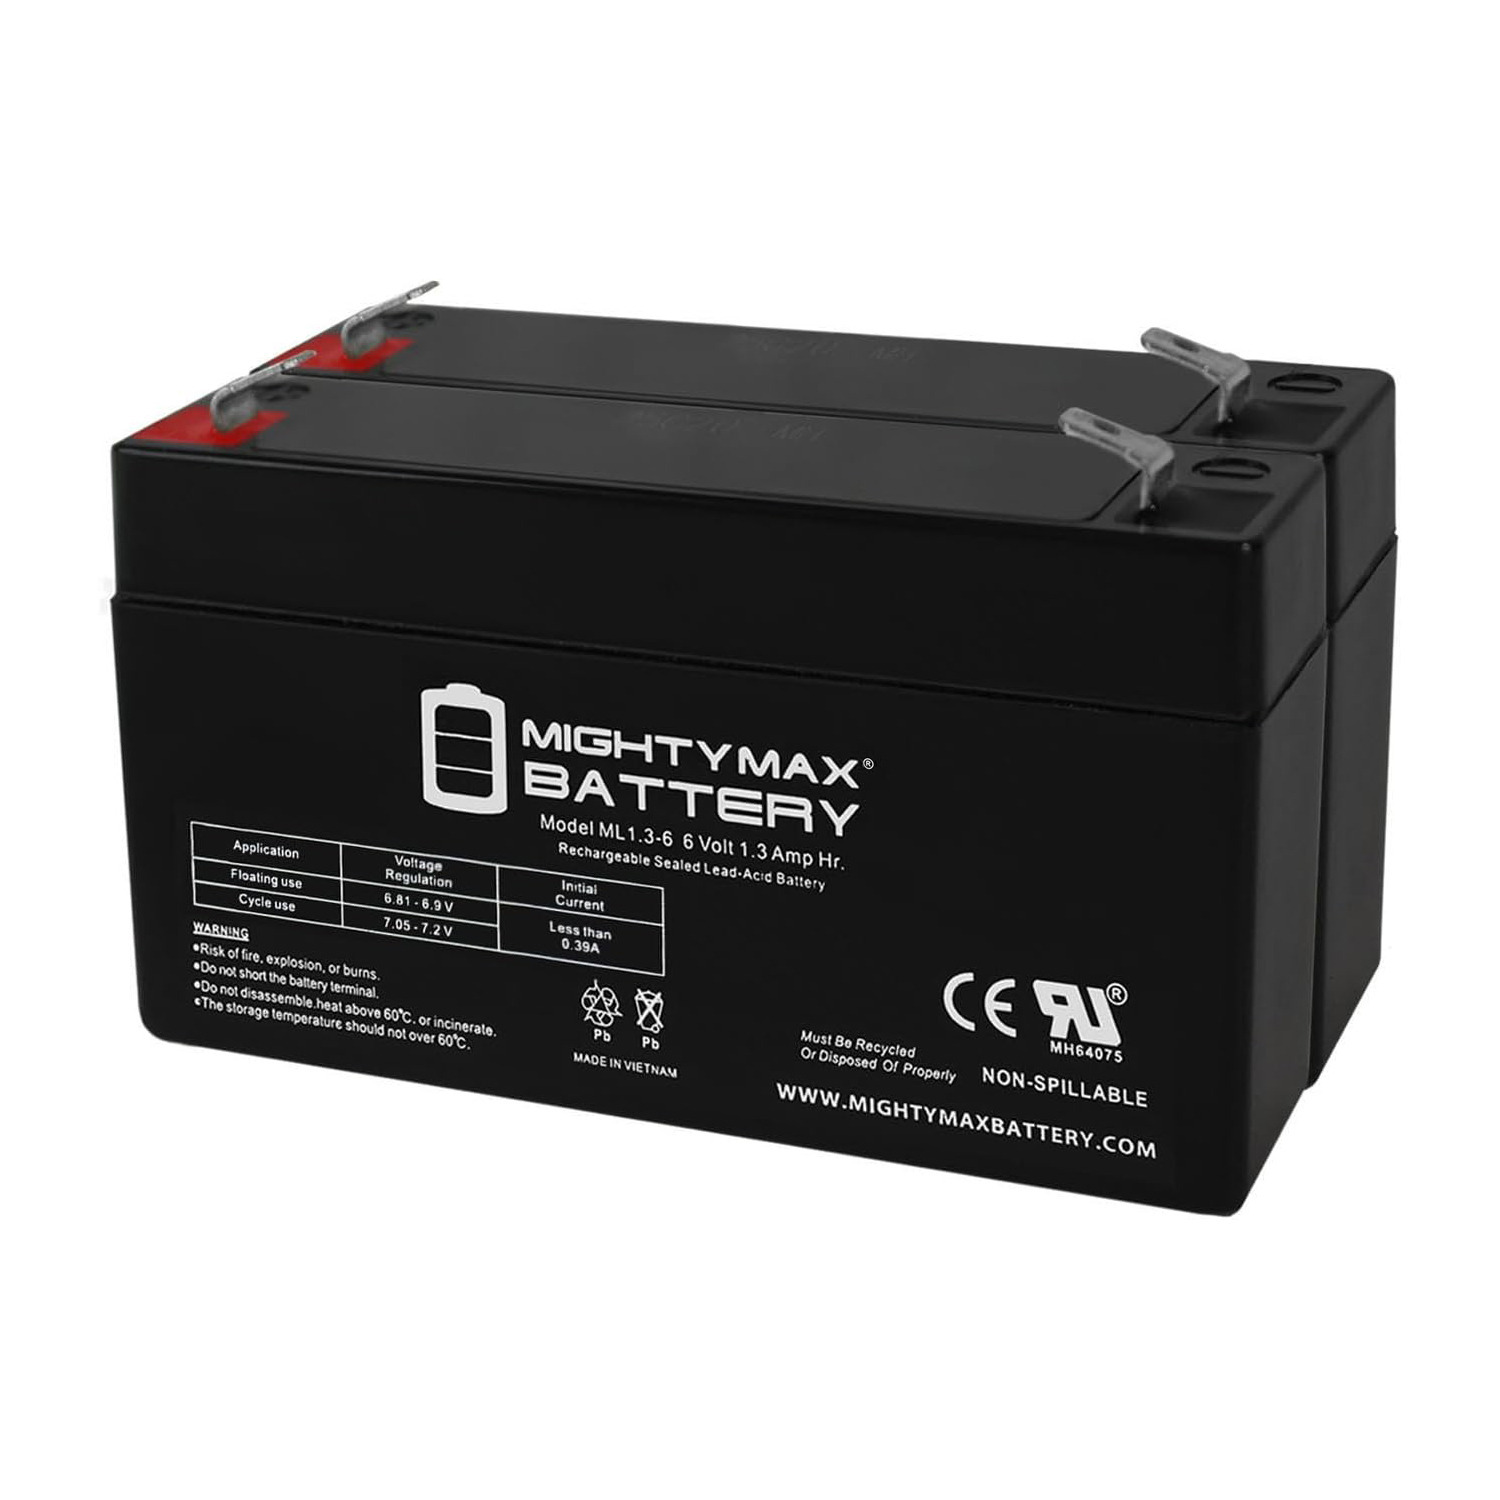 6V 1.3Ah SLA Replacement Battery for ExpertPower C2BLMFM6_1.2 - 2 Pack